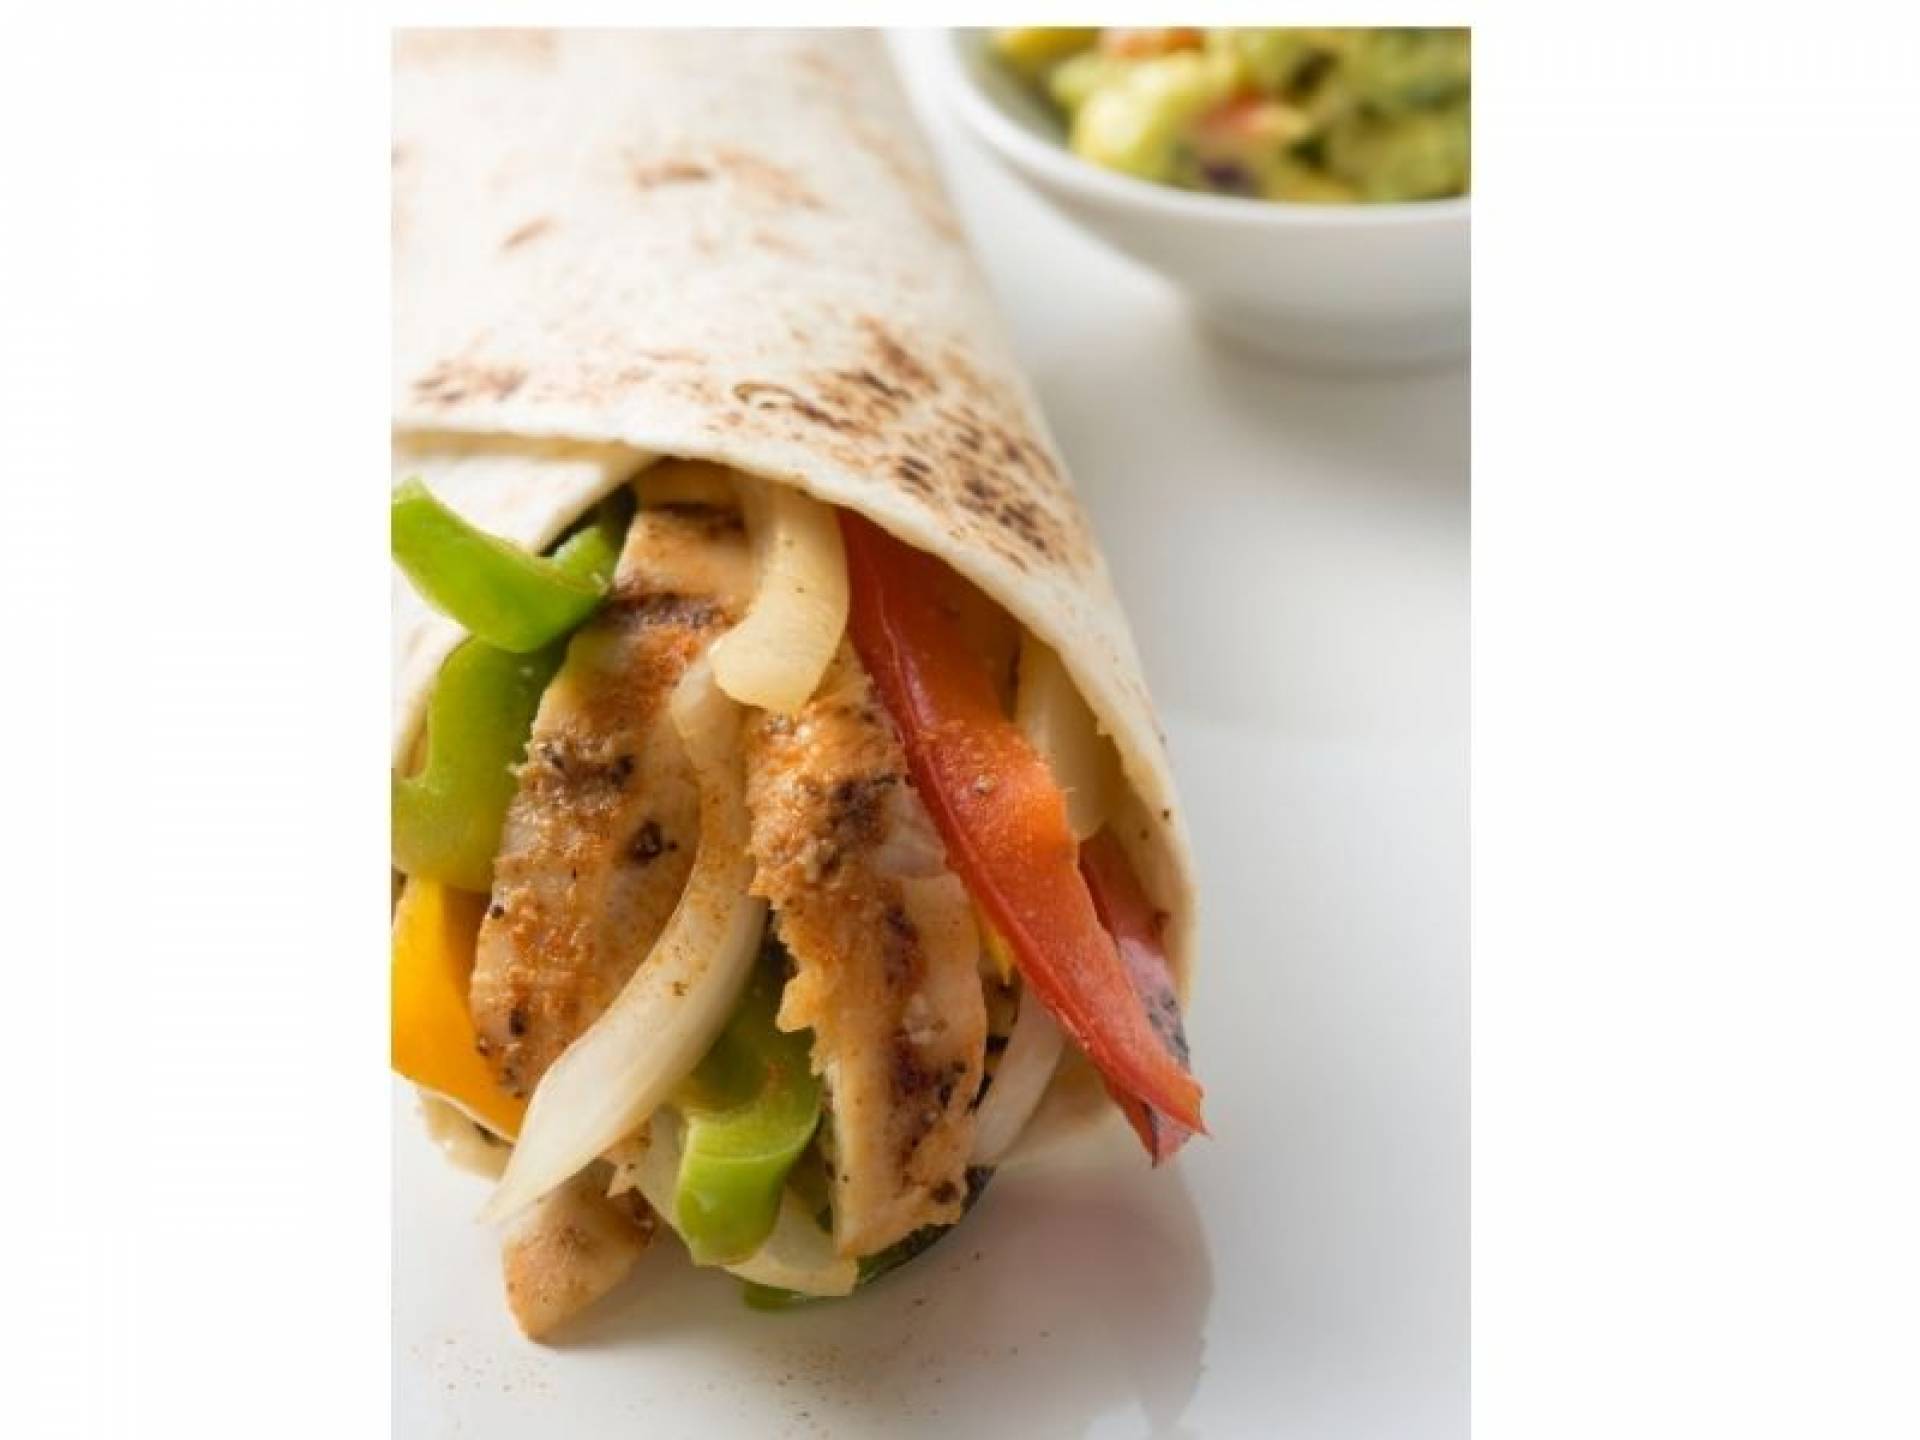 Grilled Chicken Wrap with Caramelized Onions and Melted Cheese